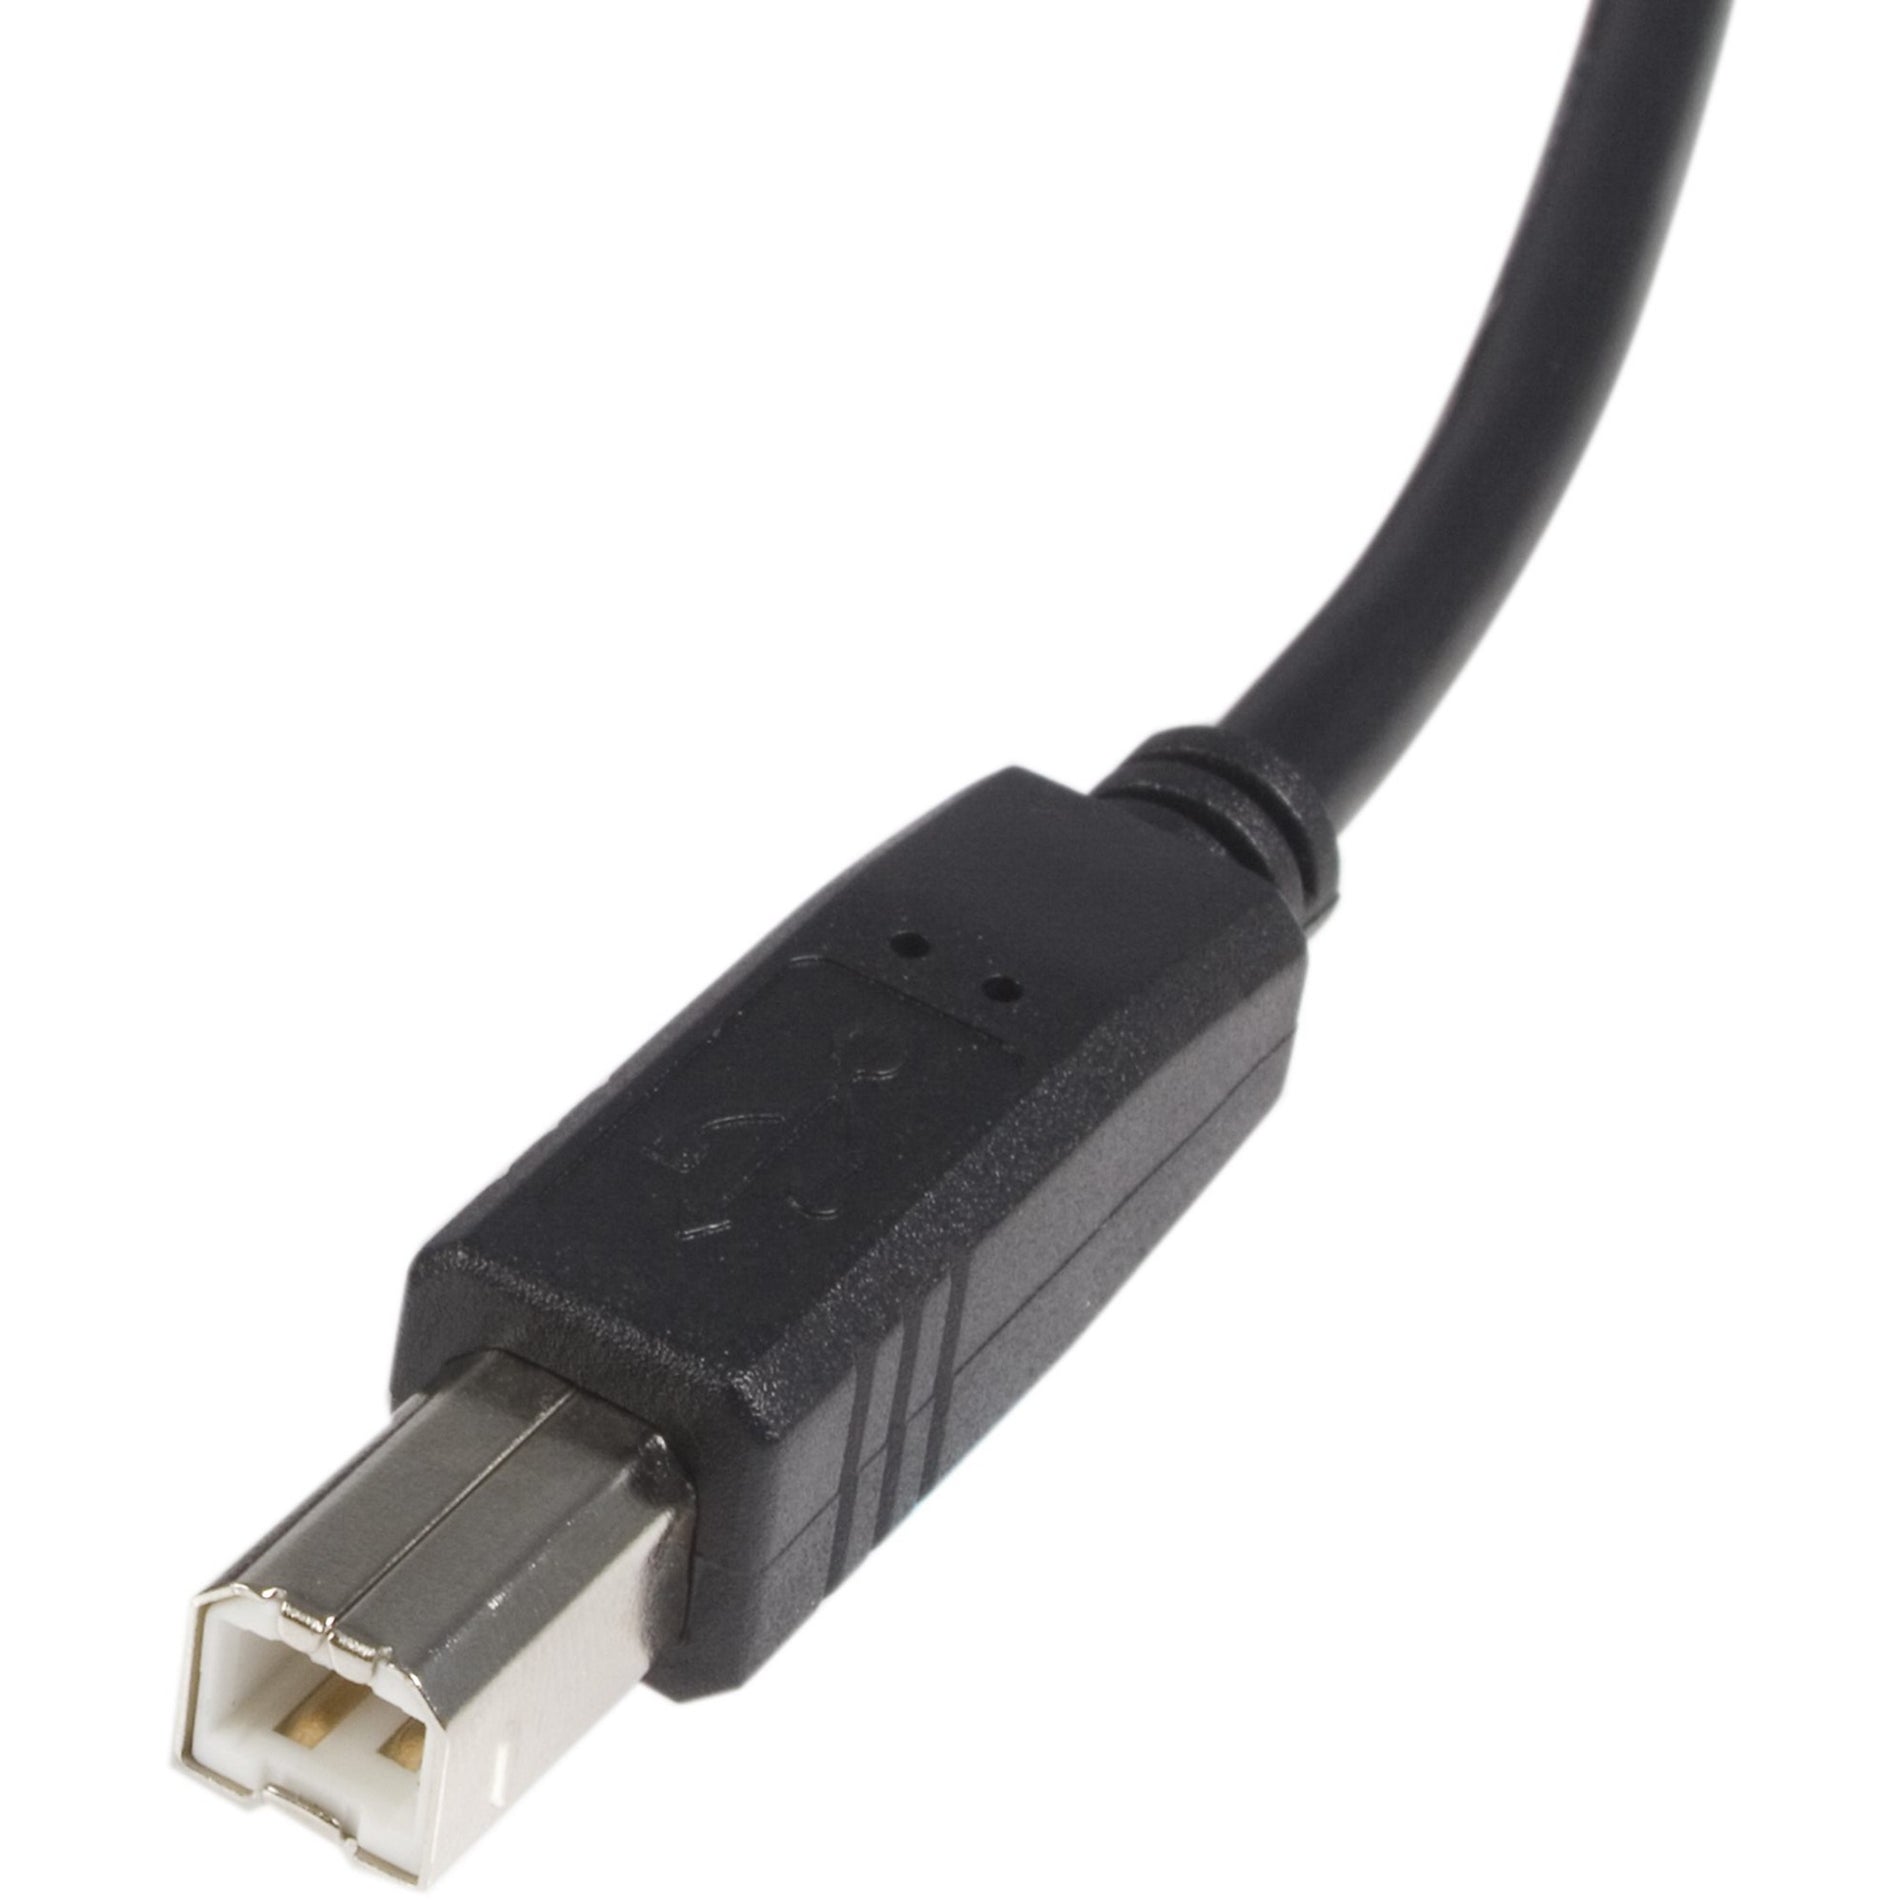 StarTech.com USB2HAB6 6 ft USB 2.0 Certified A to B Cable - M/M, Connect a USB printer or any USB peripheral device to a PC at high-performance data transfer speed